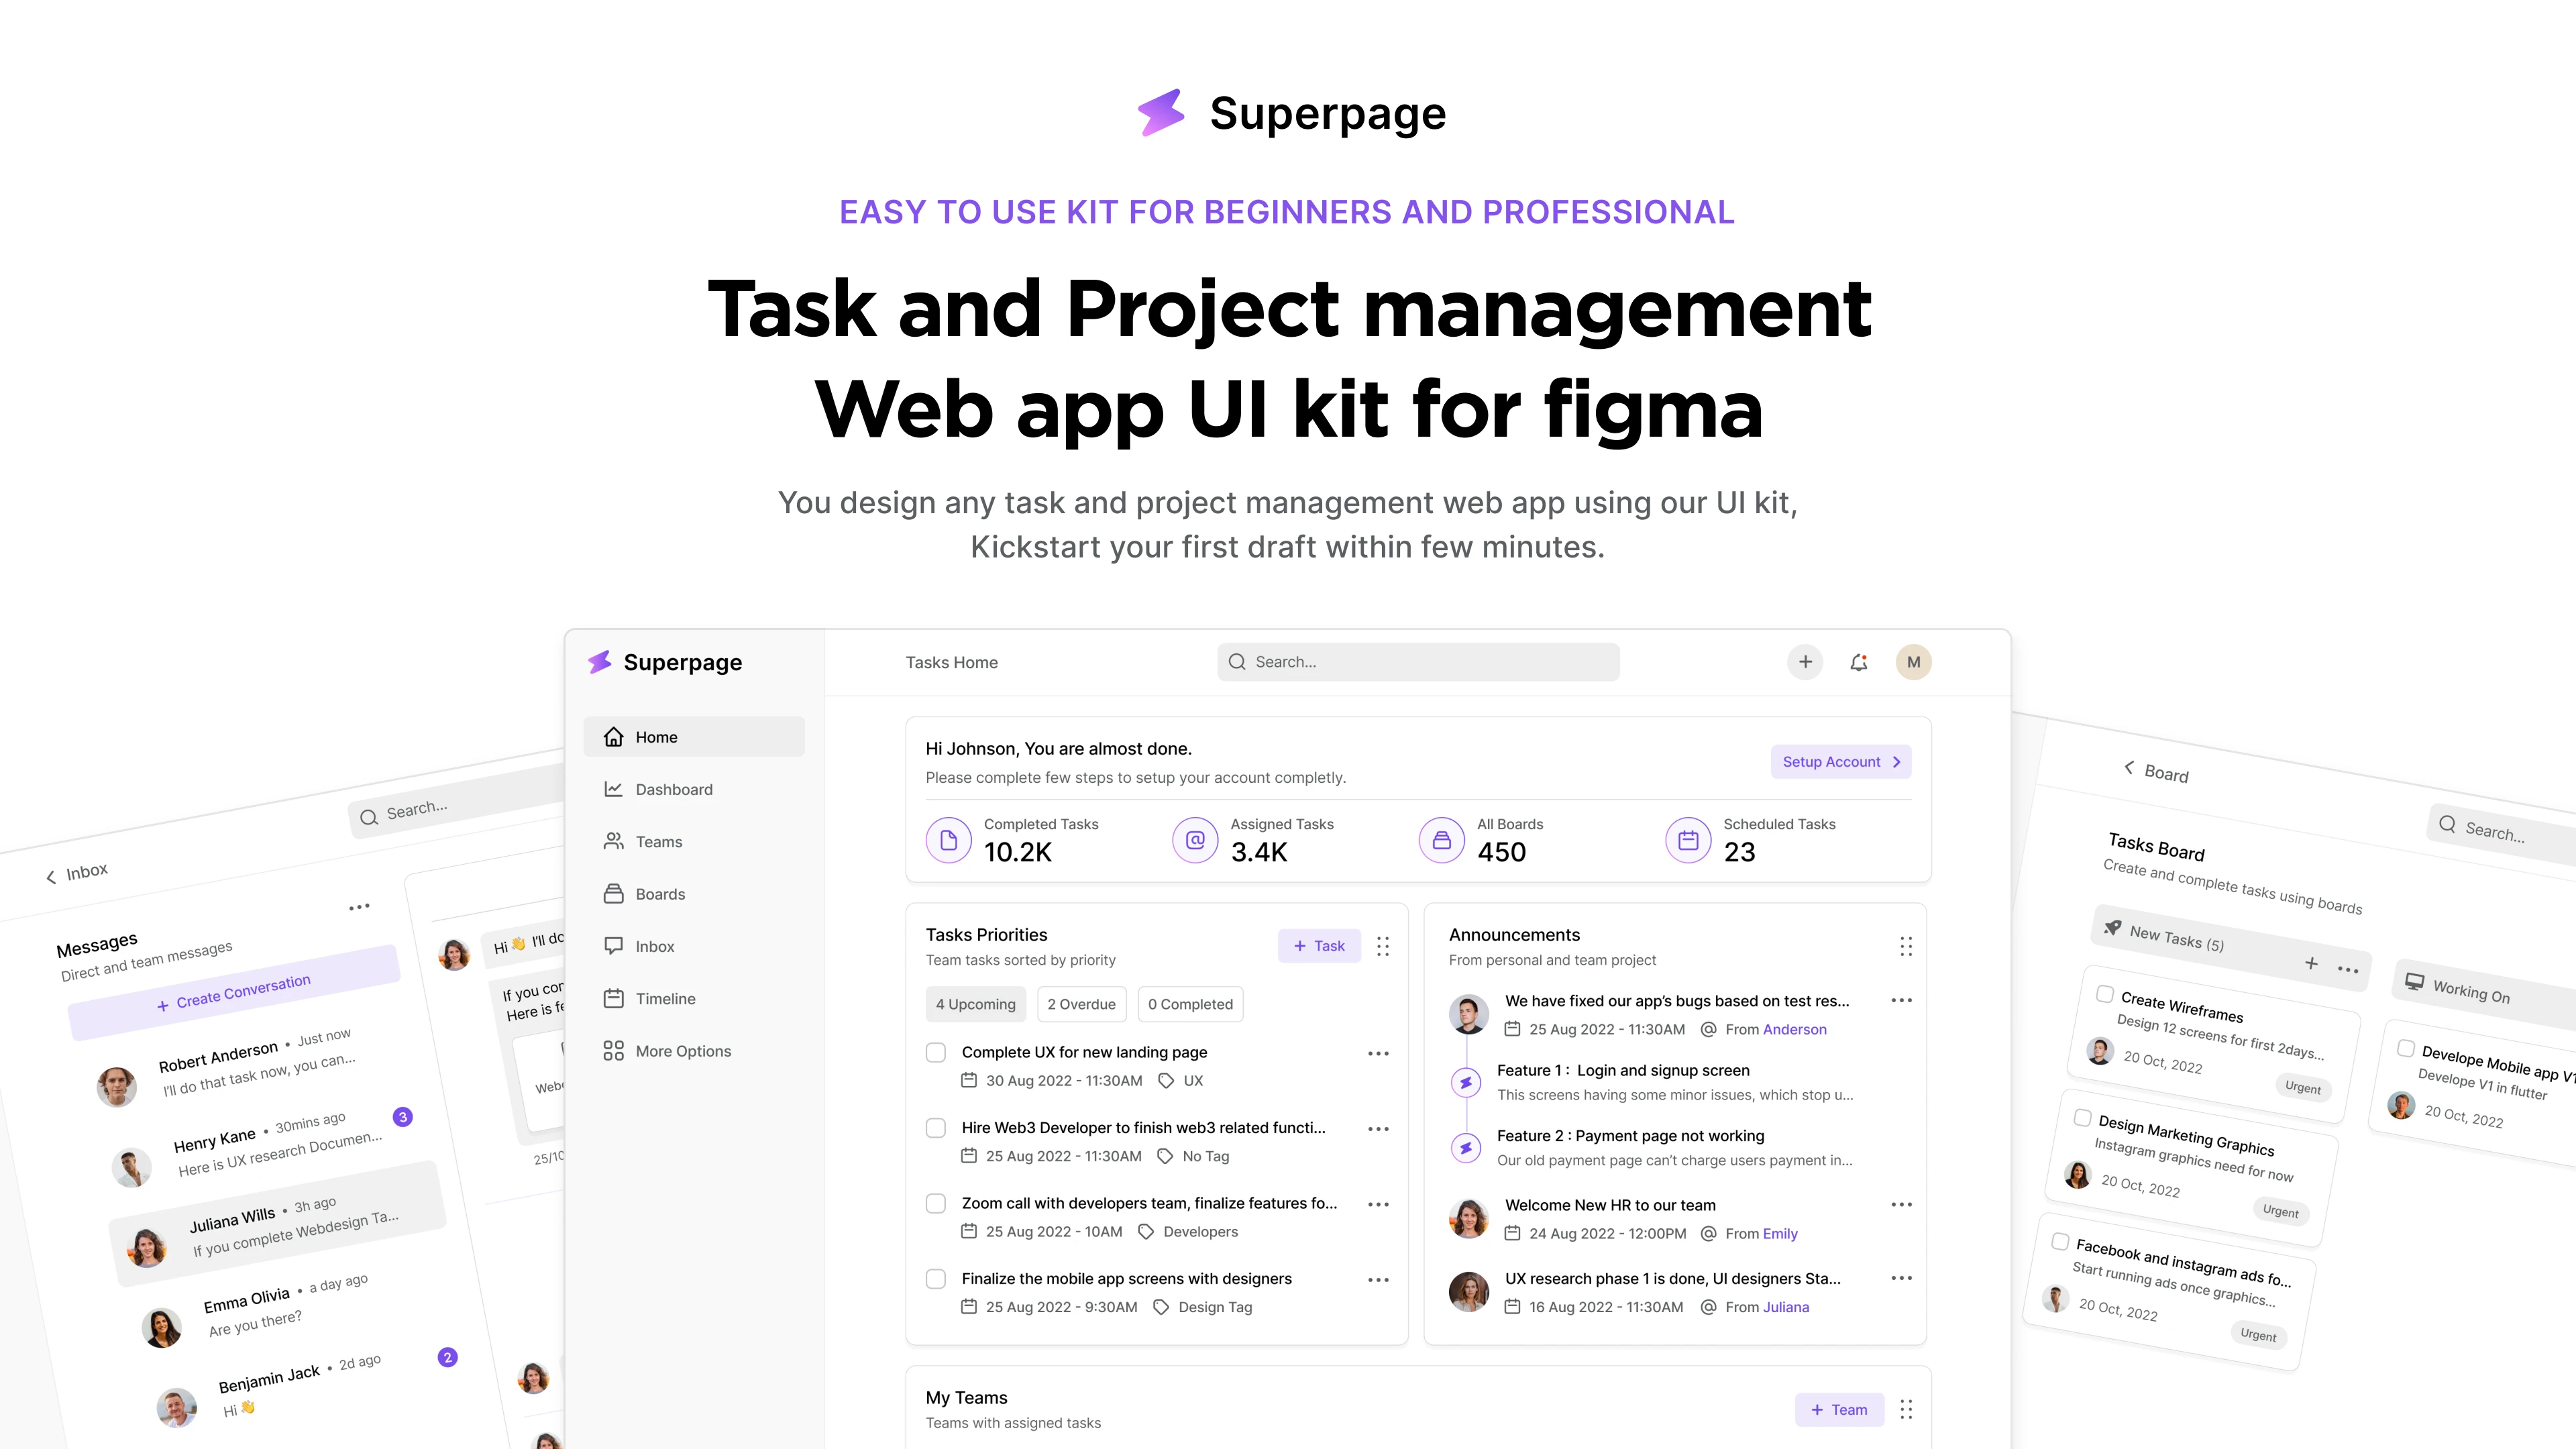 Task and Project management app UI kit for Figma and Adobe XD